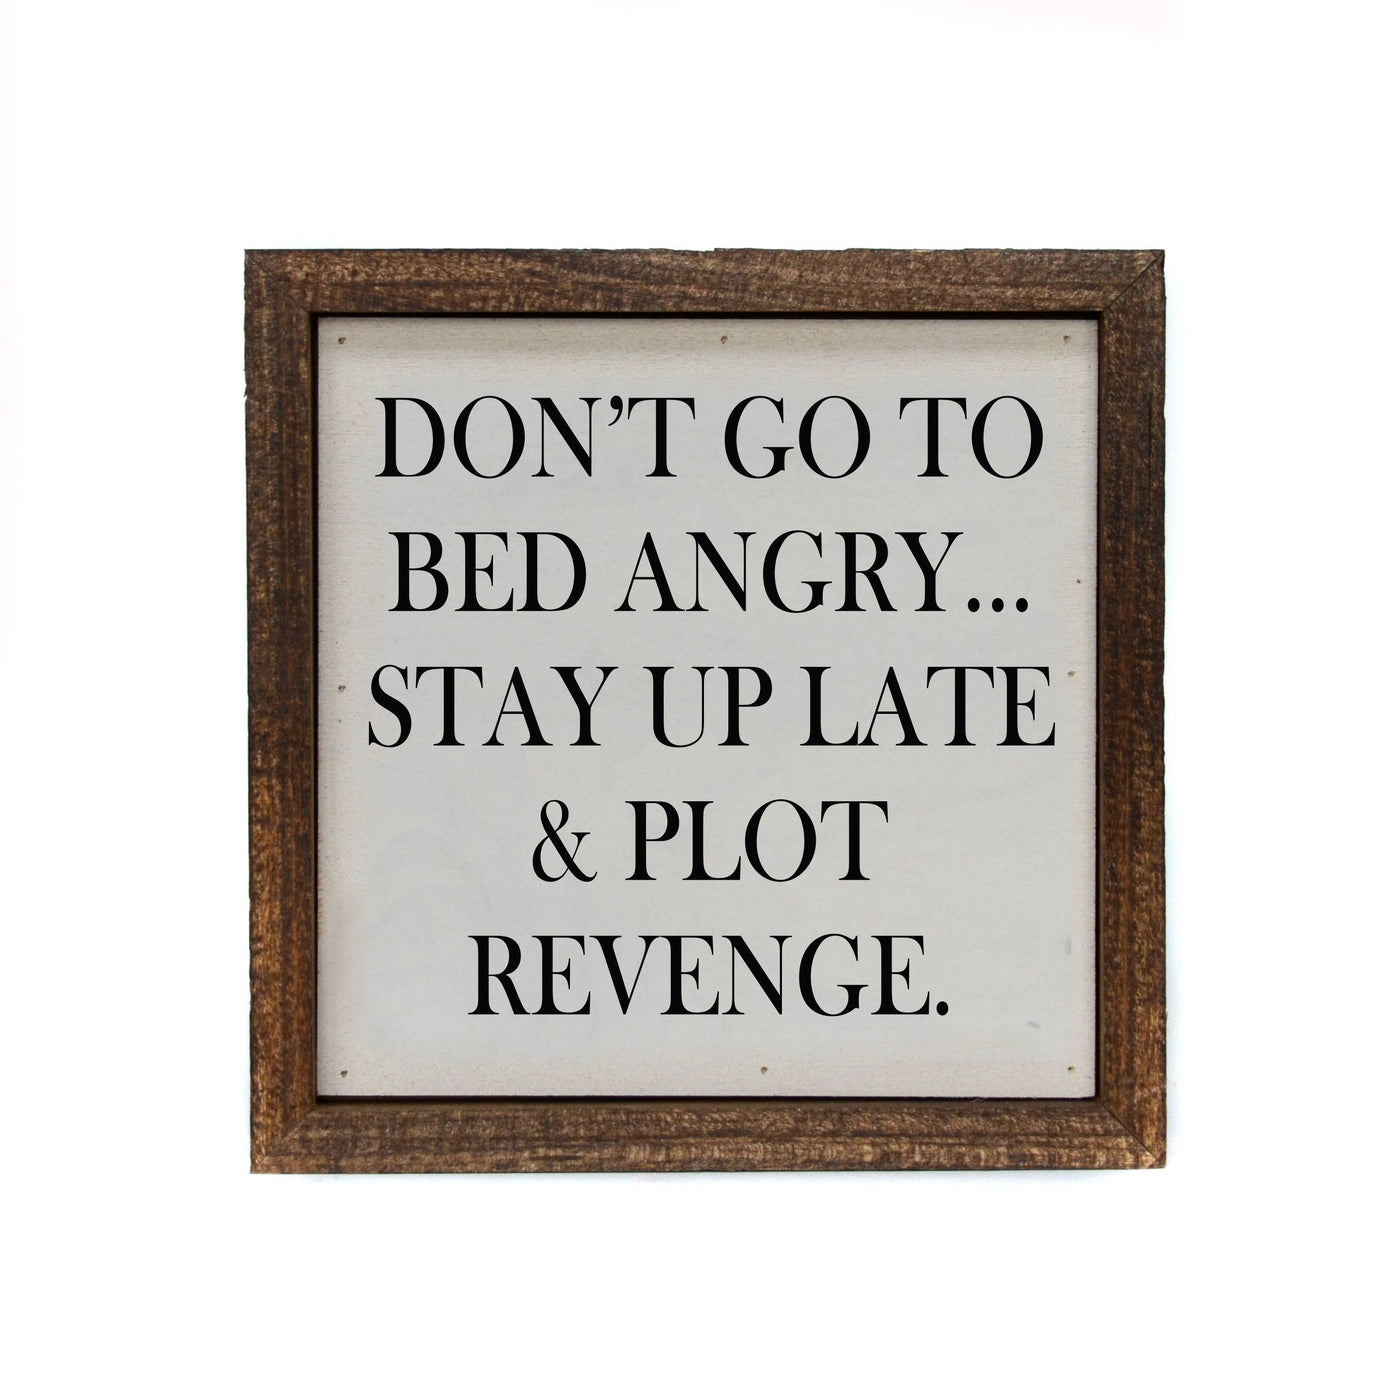 Don't Go To Bed Angry... Stay Up Late & Plot Revenge